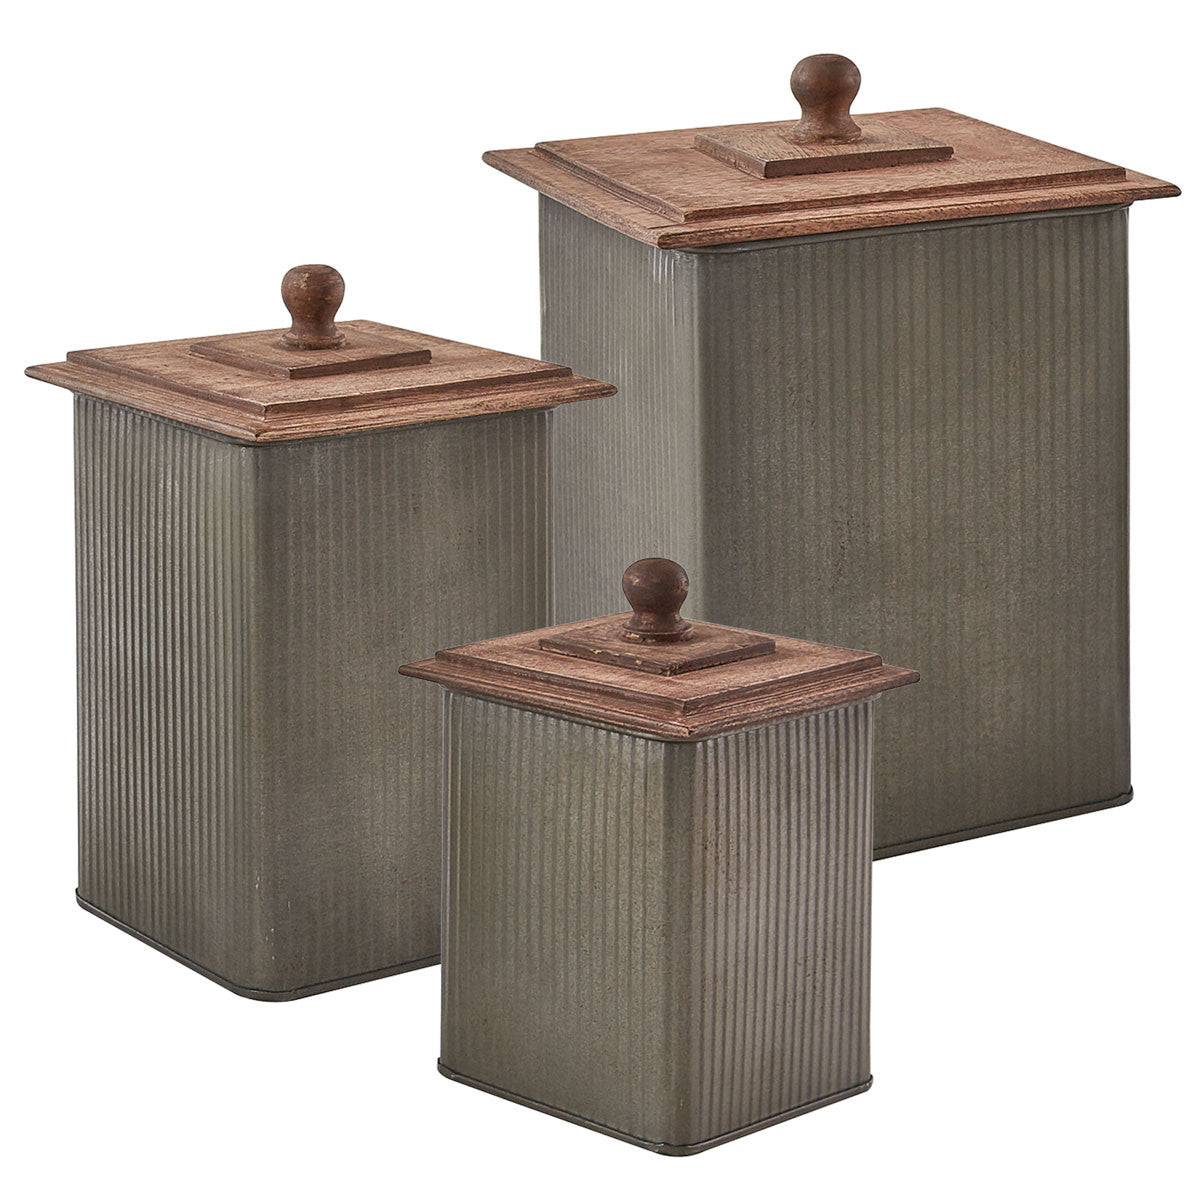 Norwood Canisters with Wood Lids - Set of 3 - Park Designs